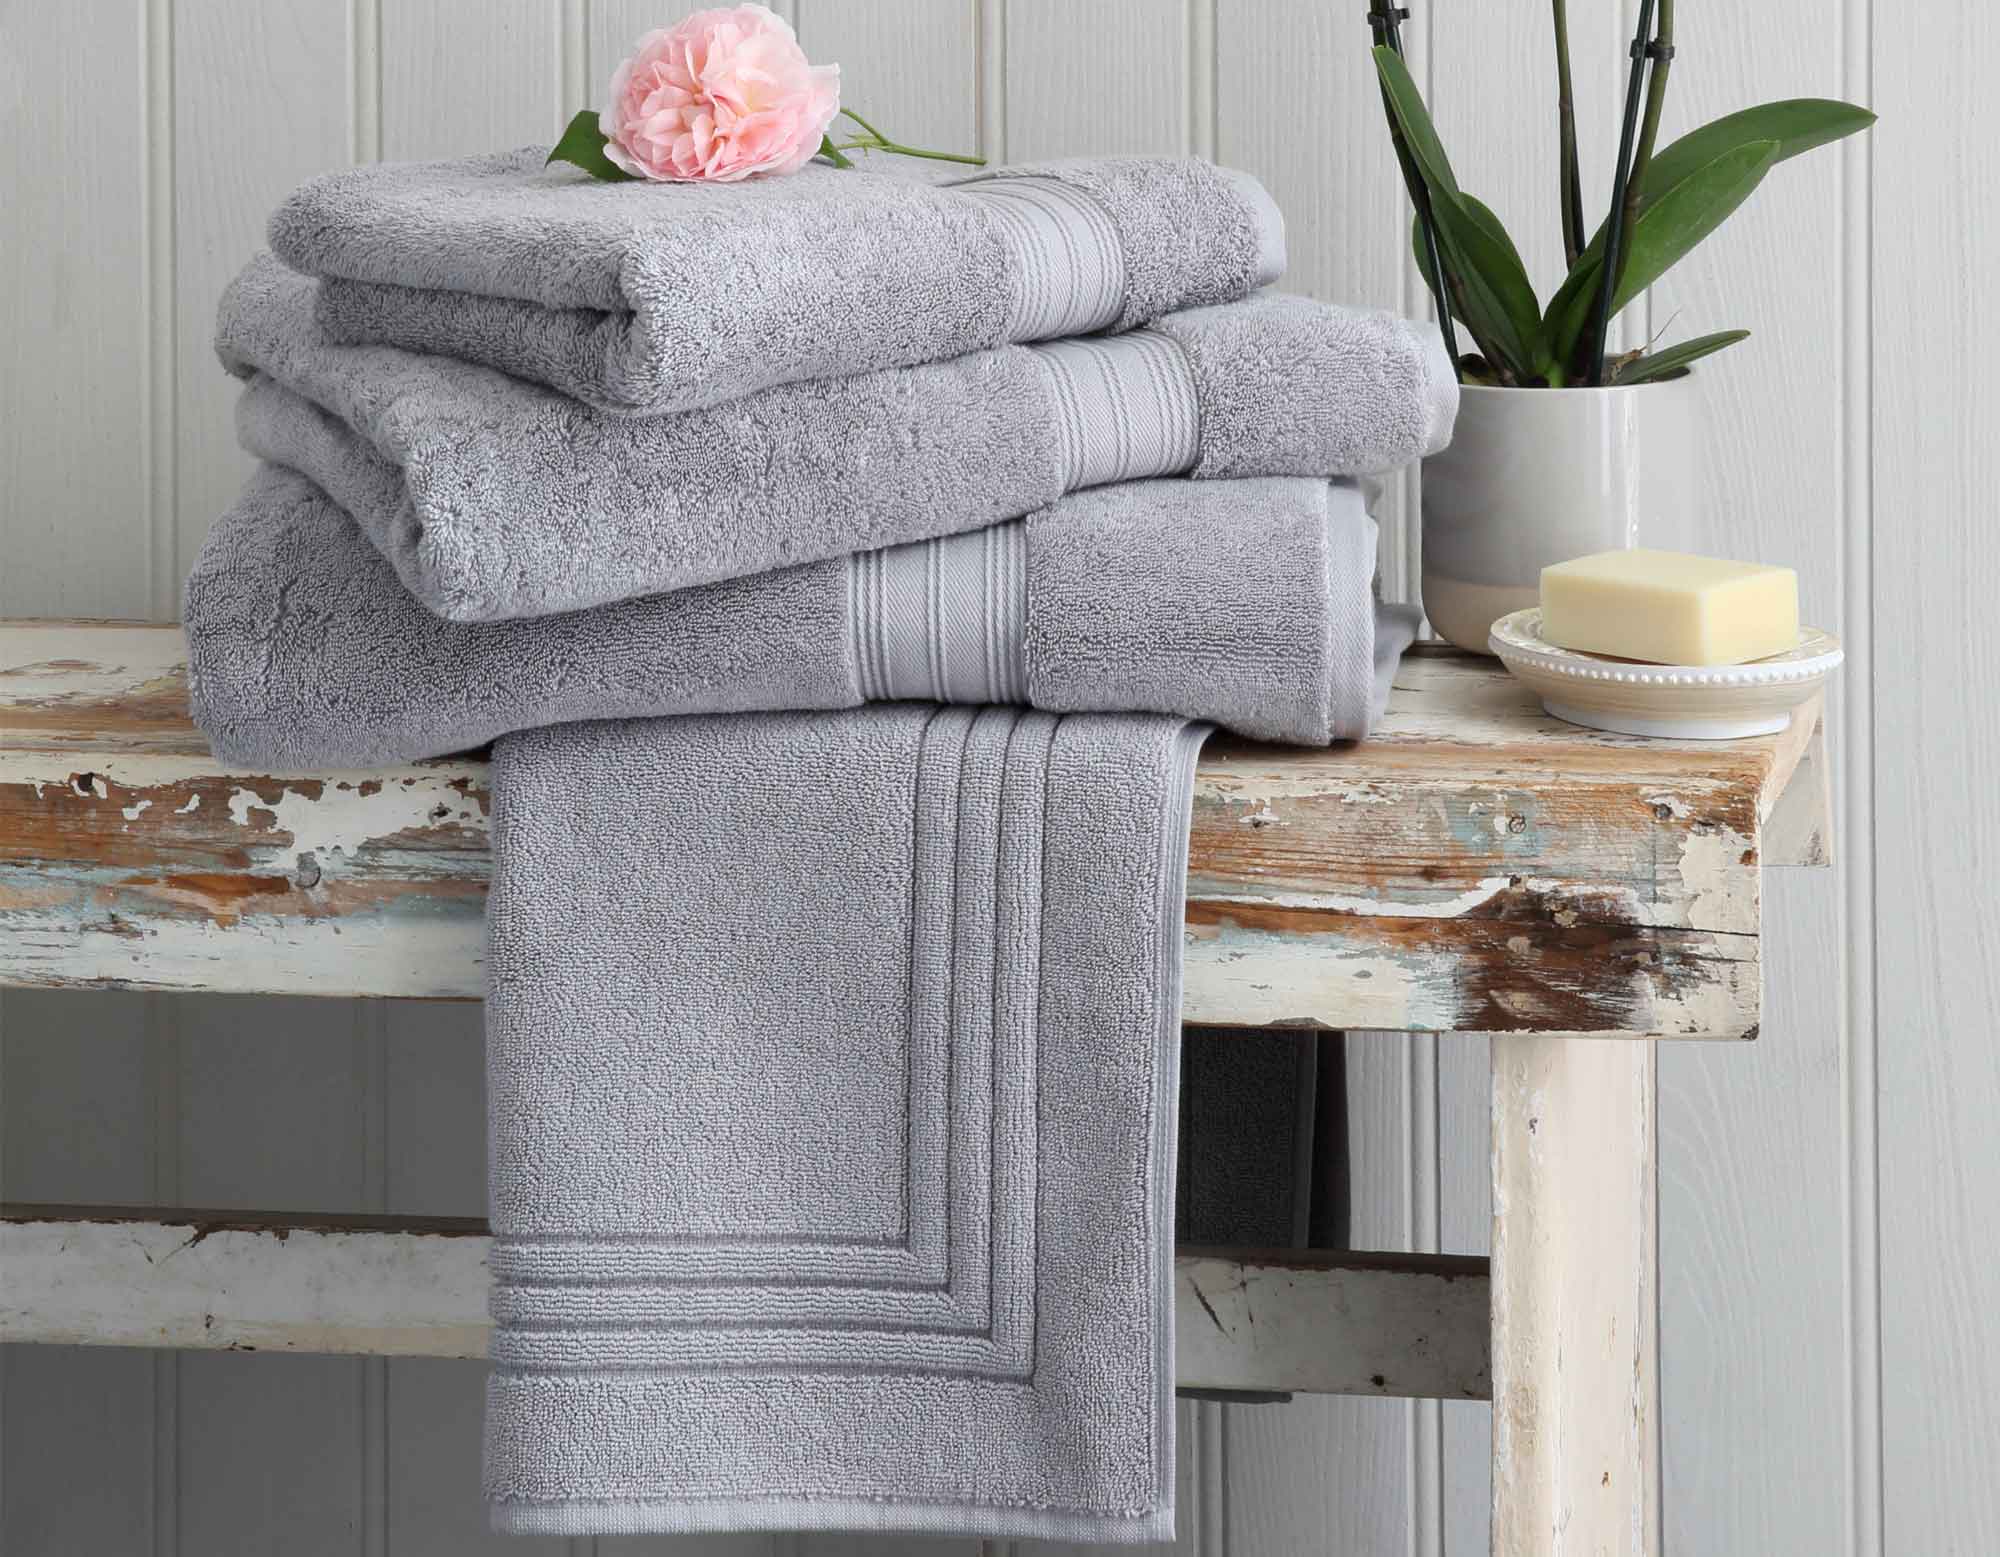 White Classic Luxury Cotton Bath Towels Large | Hotel Bathroom Towel | 27 x  54 | 4 Pack | White